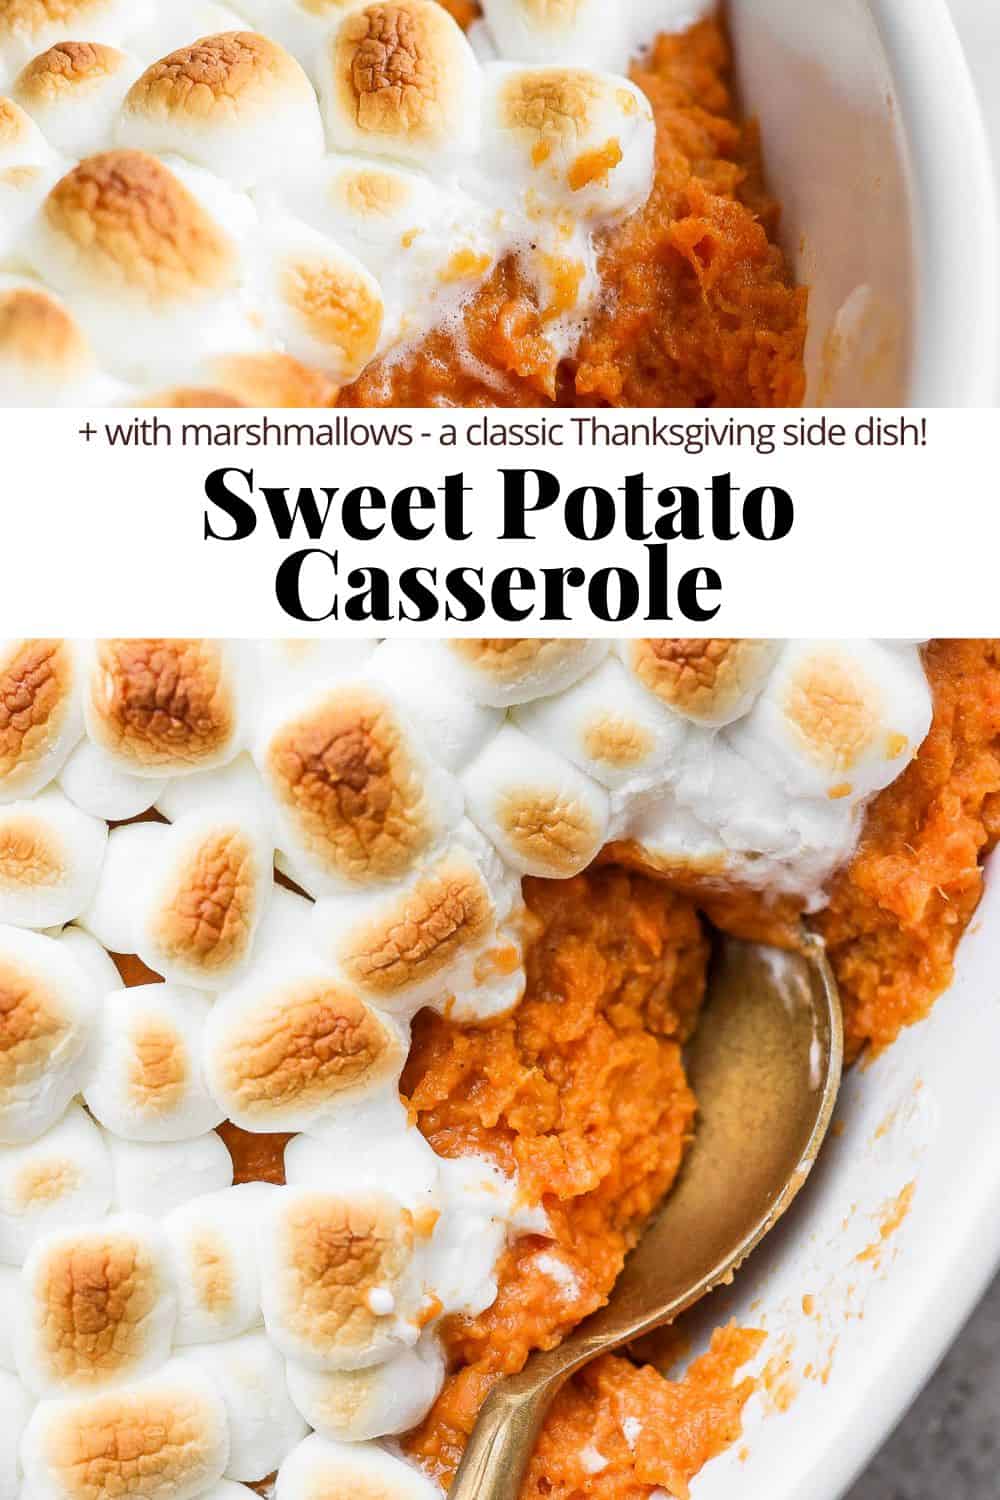 The pinterest image showing a sweet potoato casserole with marshmallows with a scoop out of the side, the recipe title, and then another image on the bottom of a spoon scooping out a serving of sweet potato casserole with mini marshmallows.